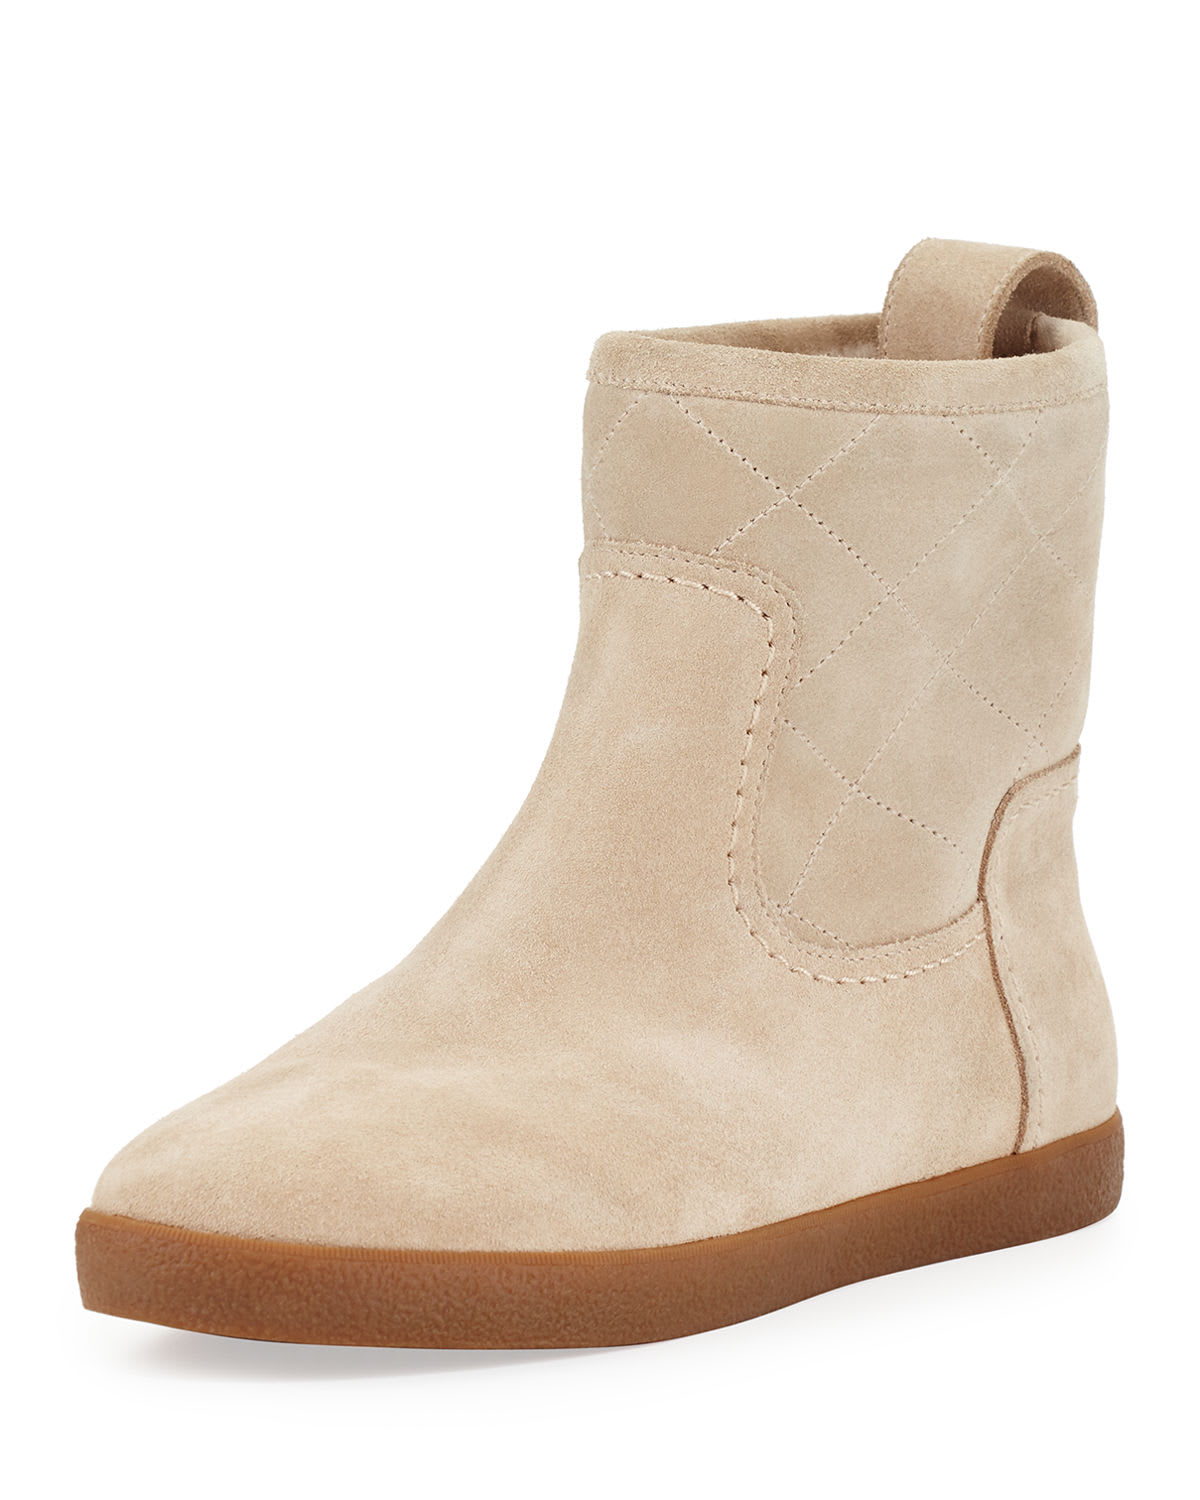 Tory Burch Alana Quilted Shearling Fur Bootie, Light Camel